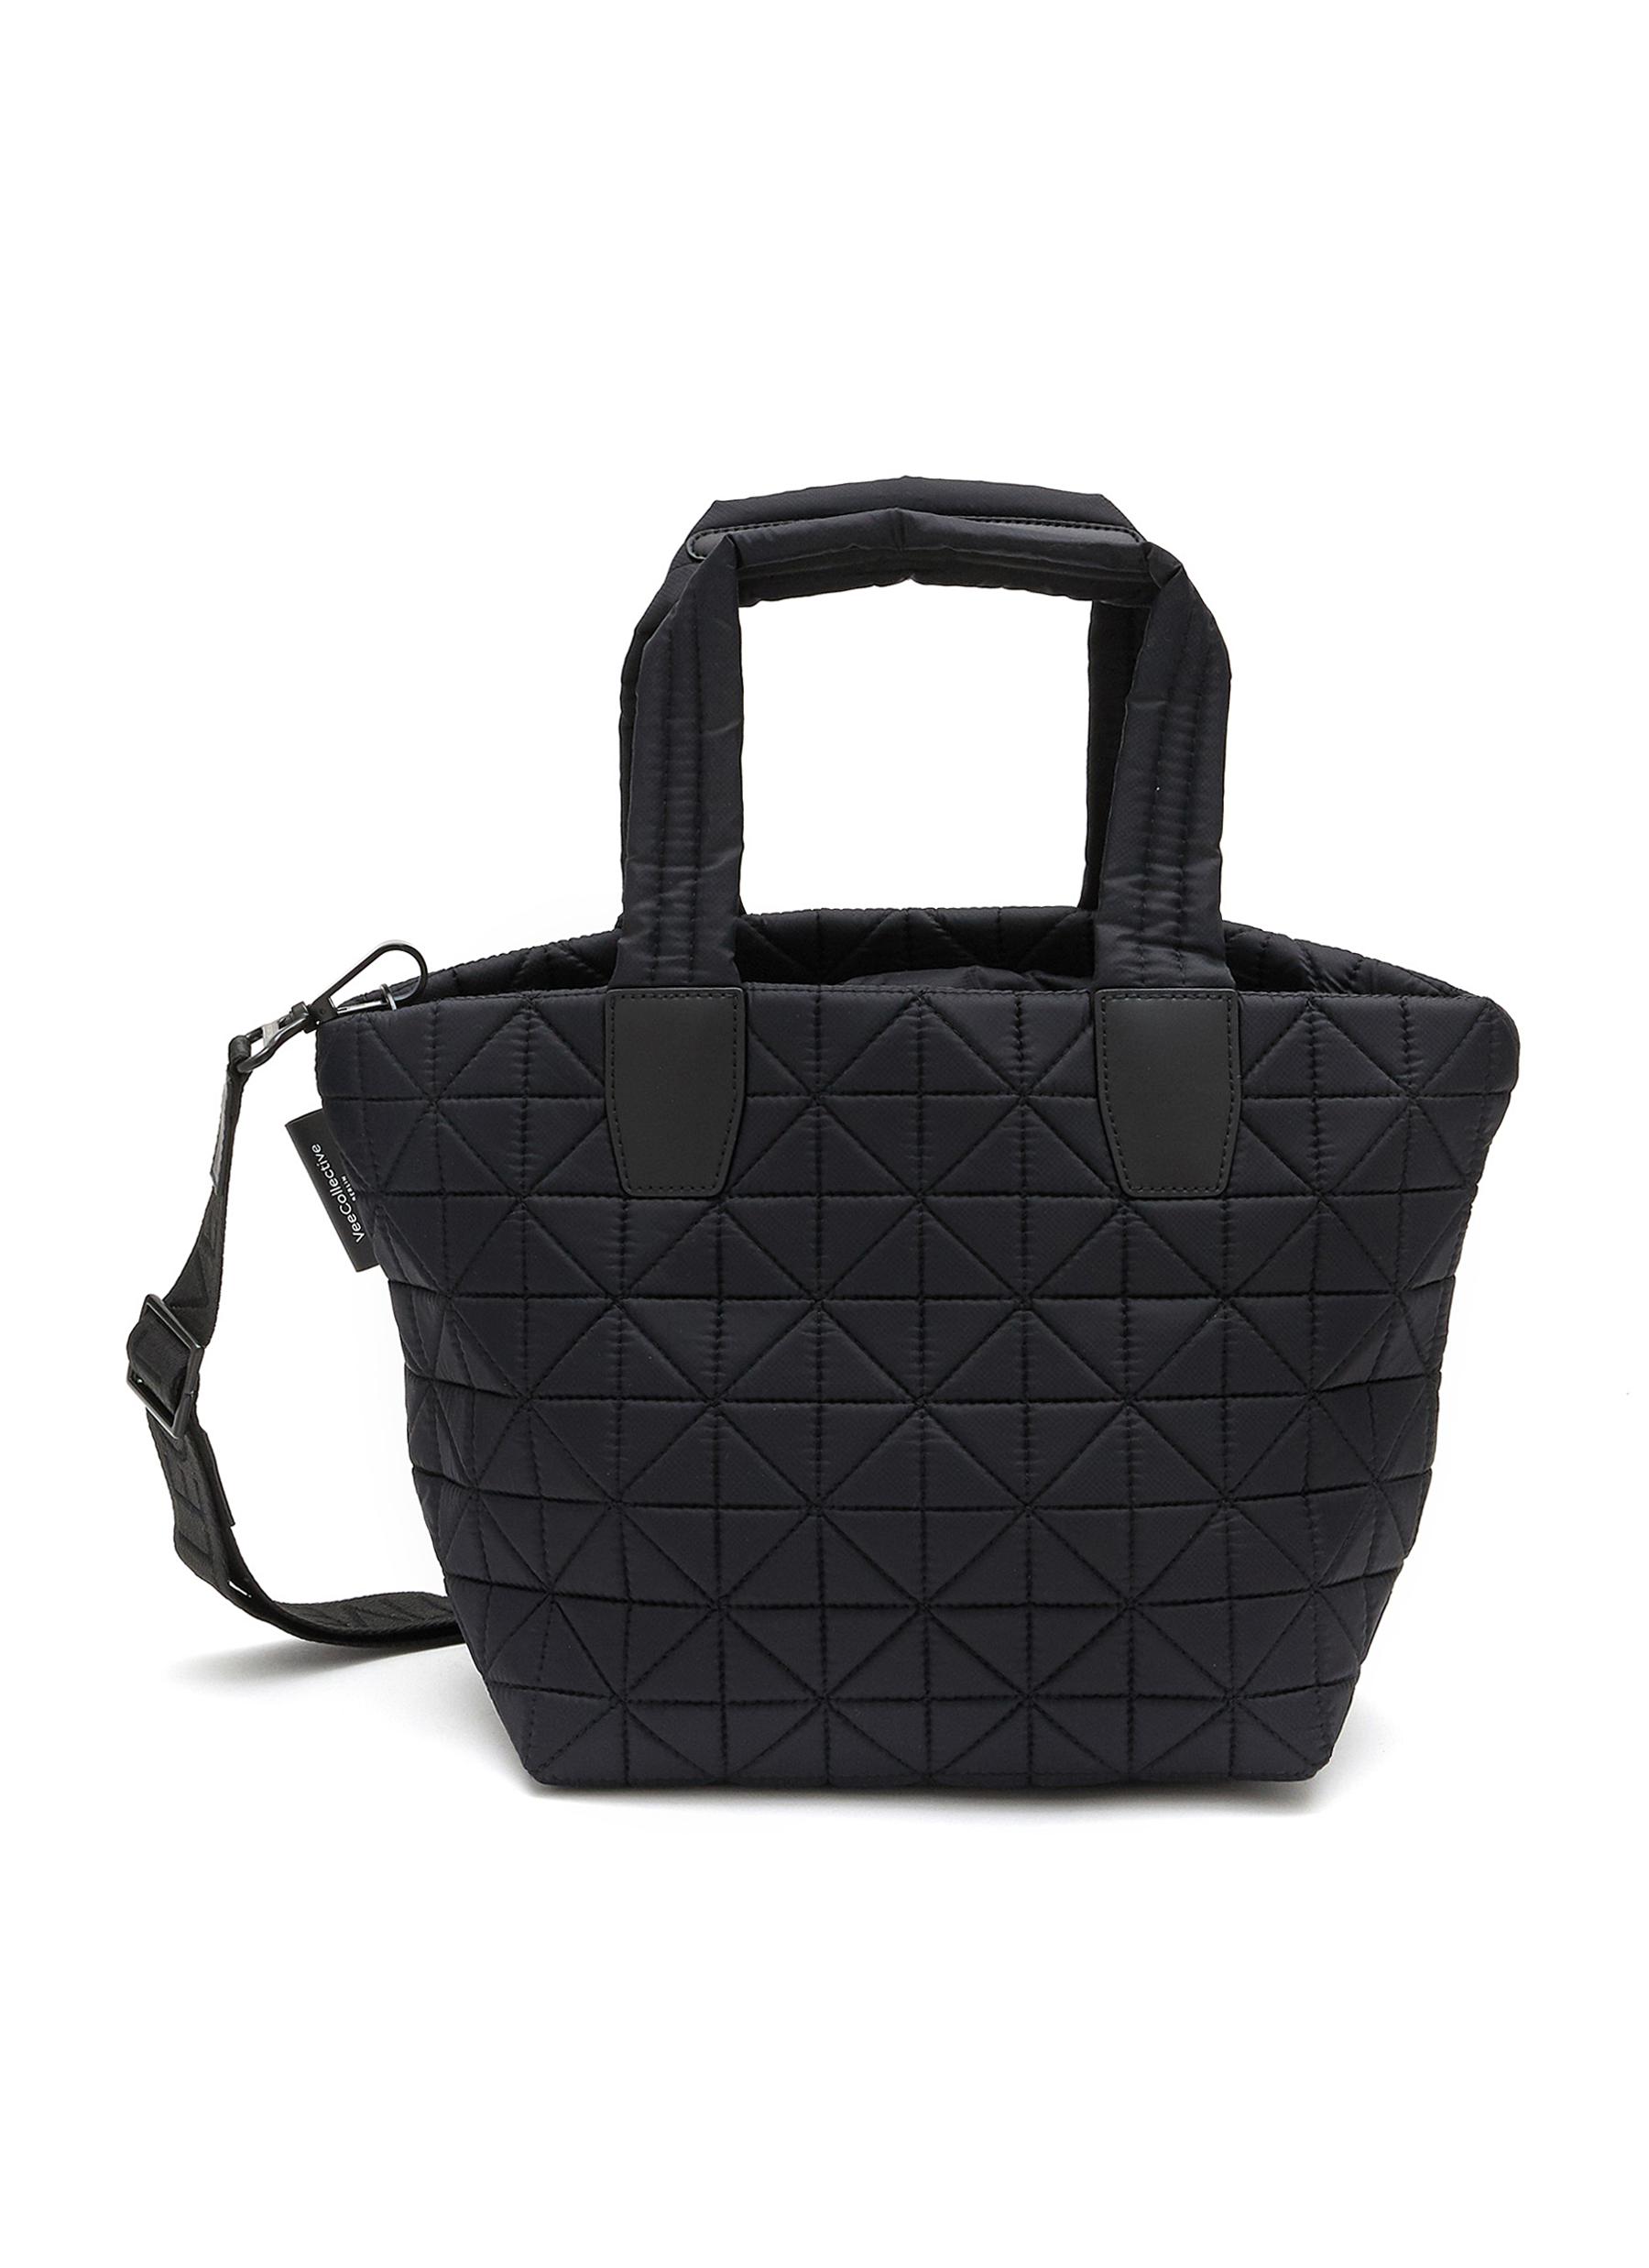 VEECOLLECTIVE, Small Vee Recycled Nylon Tote Bag, BLACK